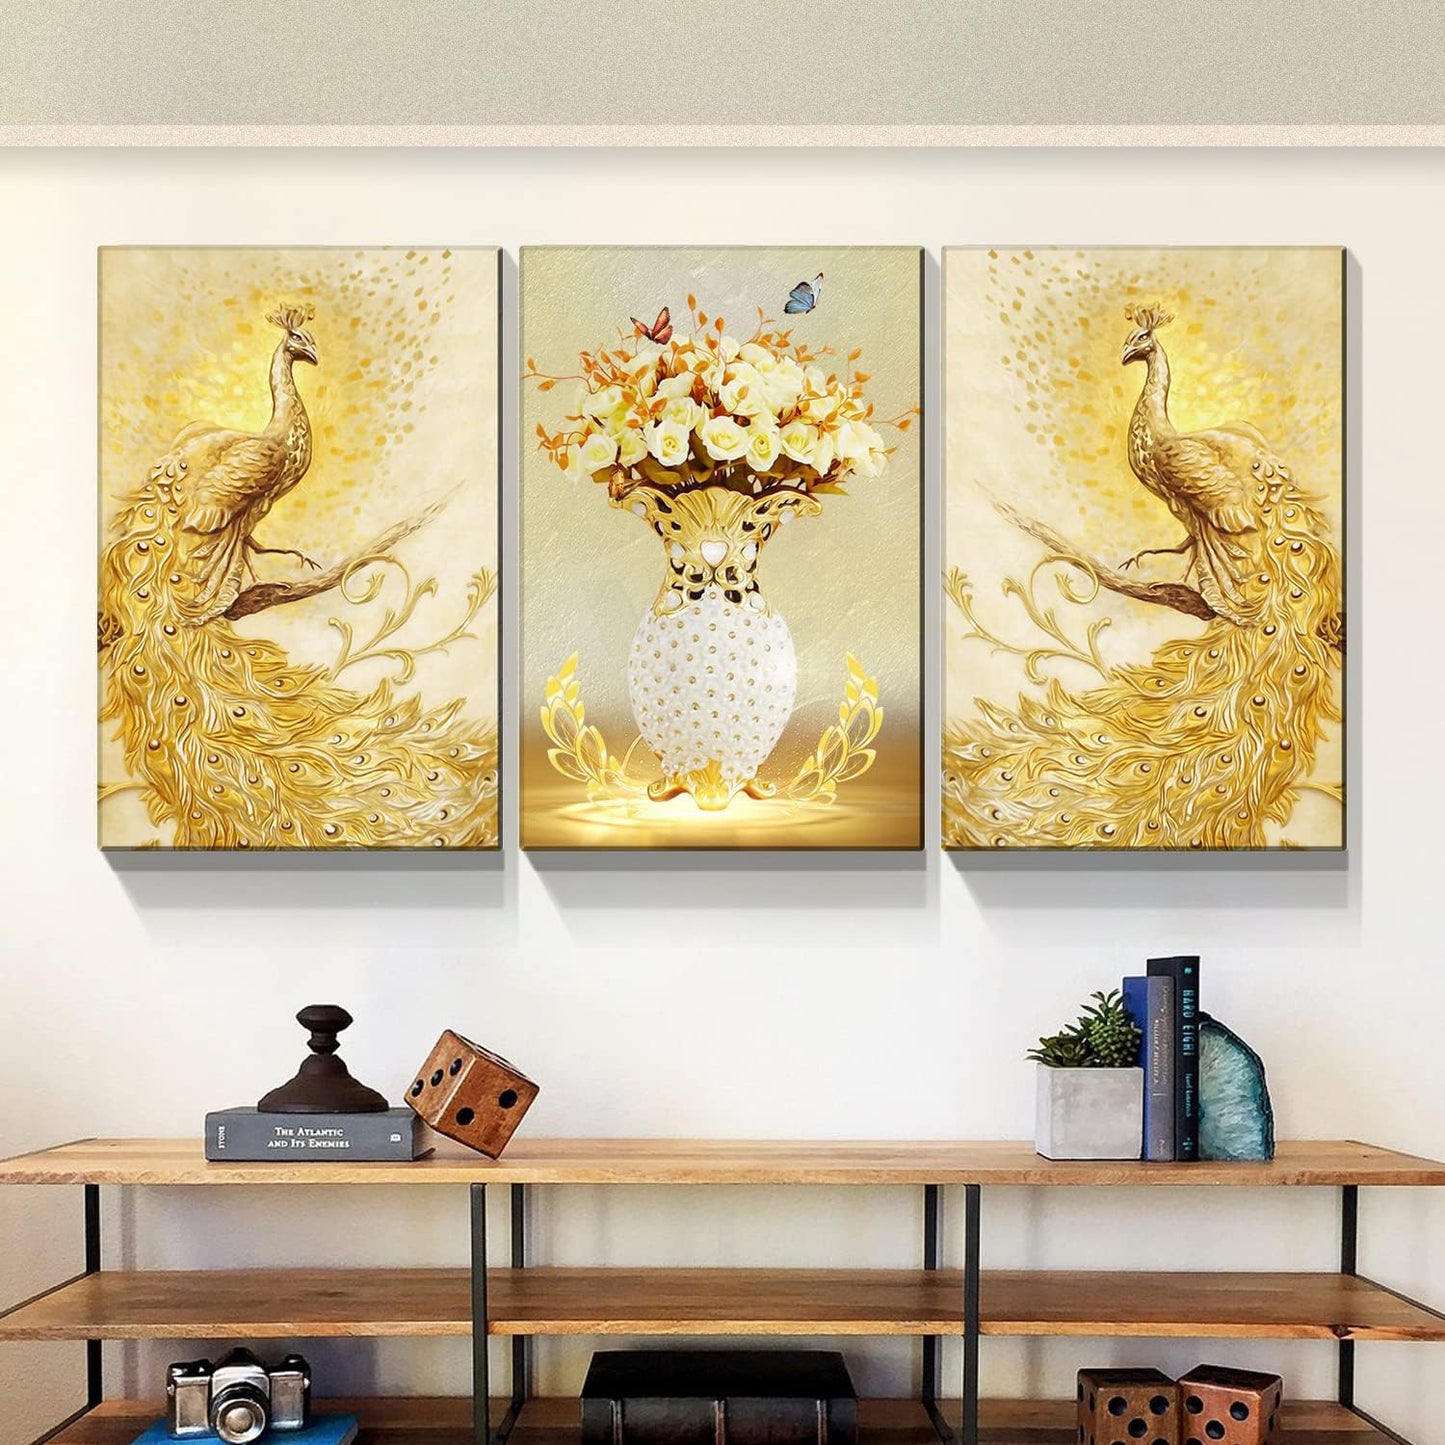 Brusheslife Peacock Wall Art: Luxurious Yellow Couple with Flower Vase